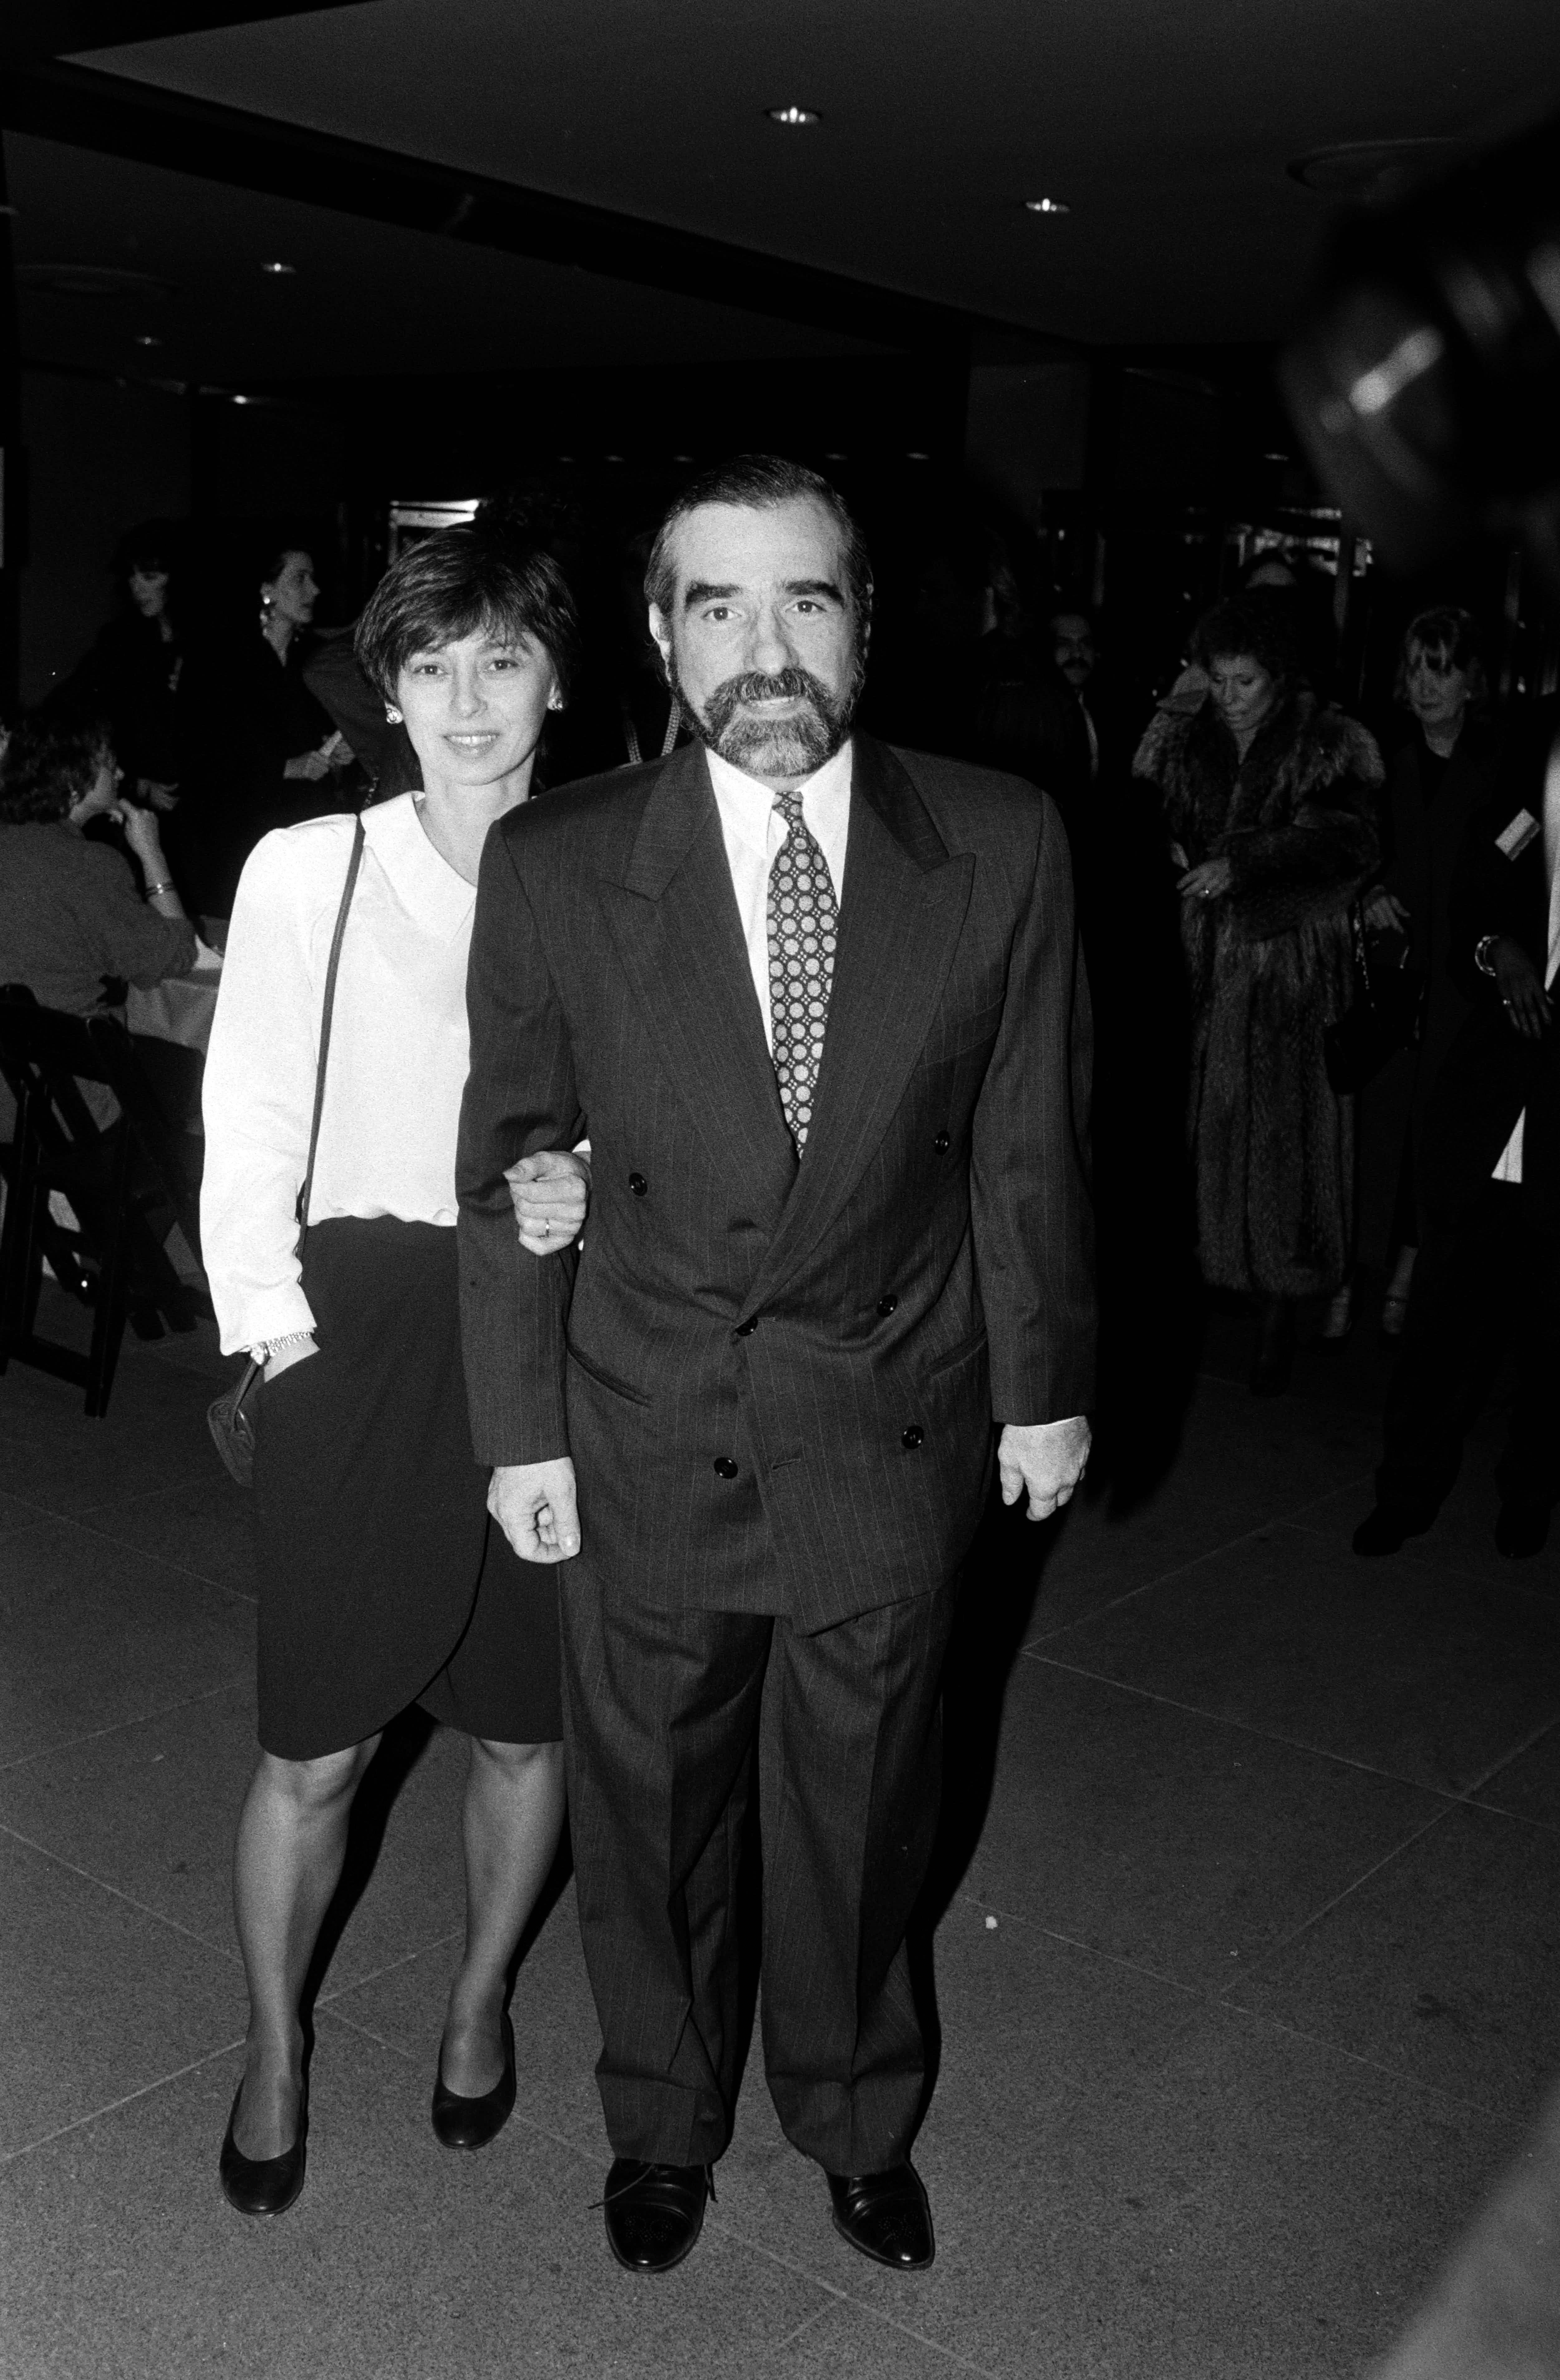 Barbara De Fina and Martin Scorsese attended an event at the Museum of Modern Art in New York City on February 27, 1989